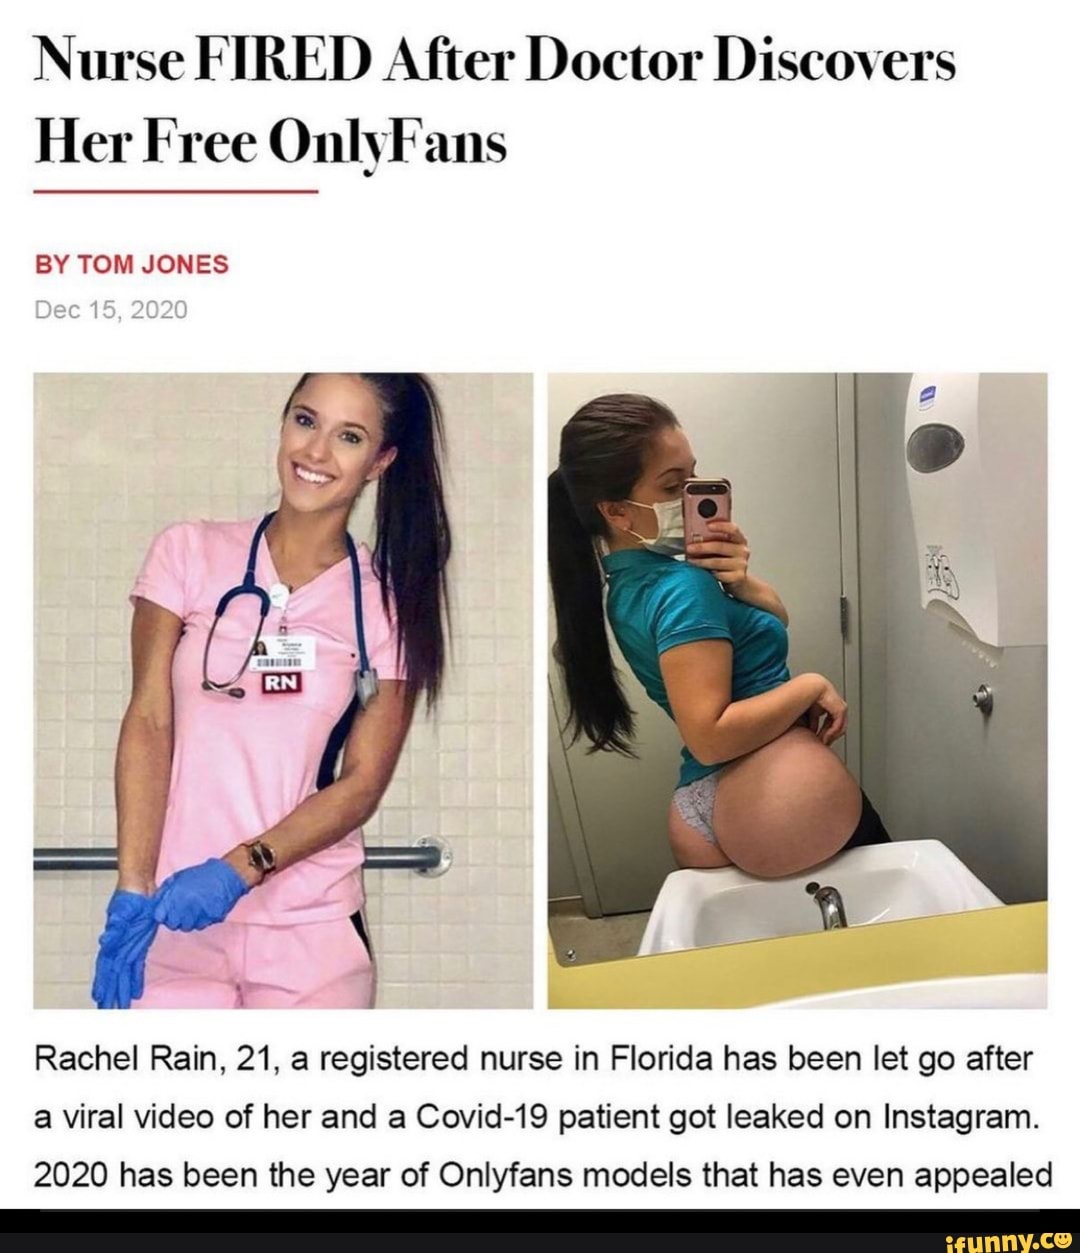 21 year old nurse fired for only fans